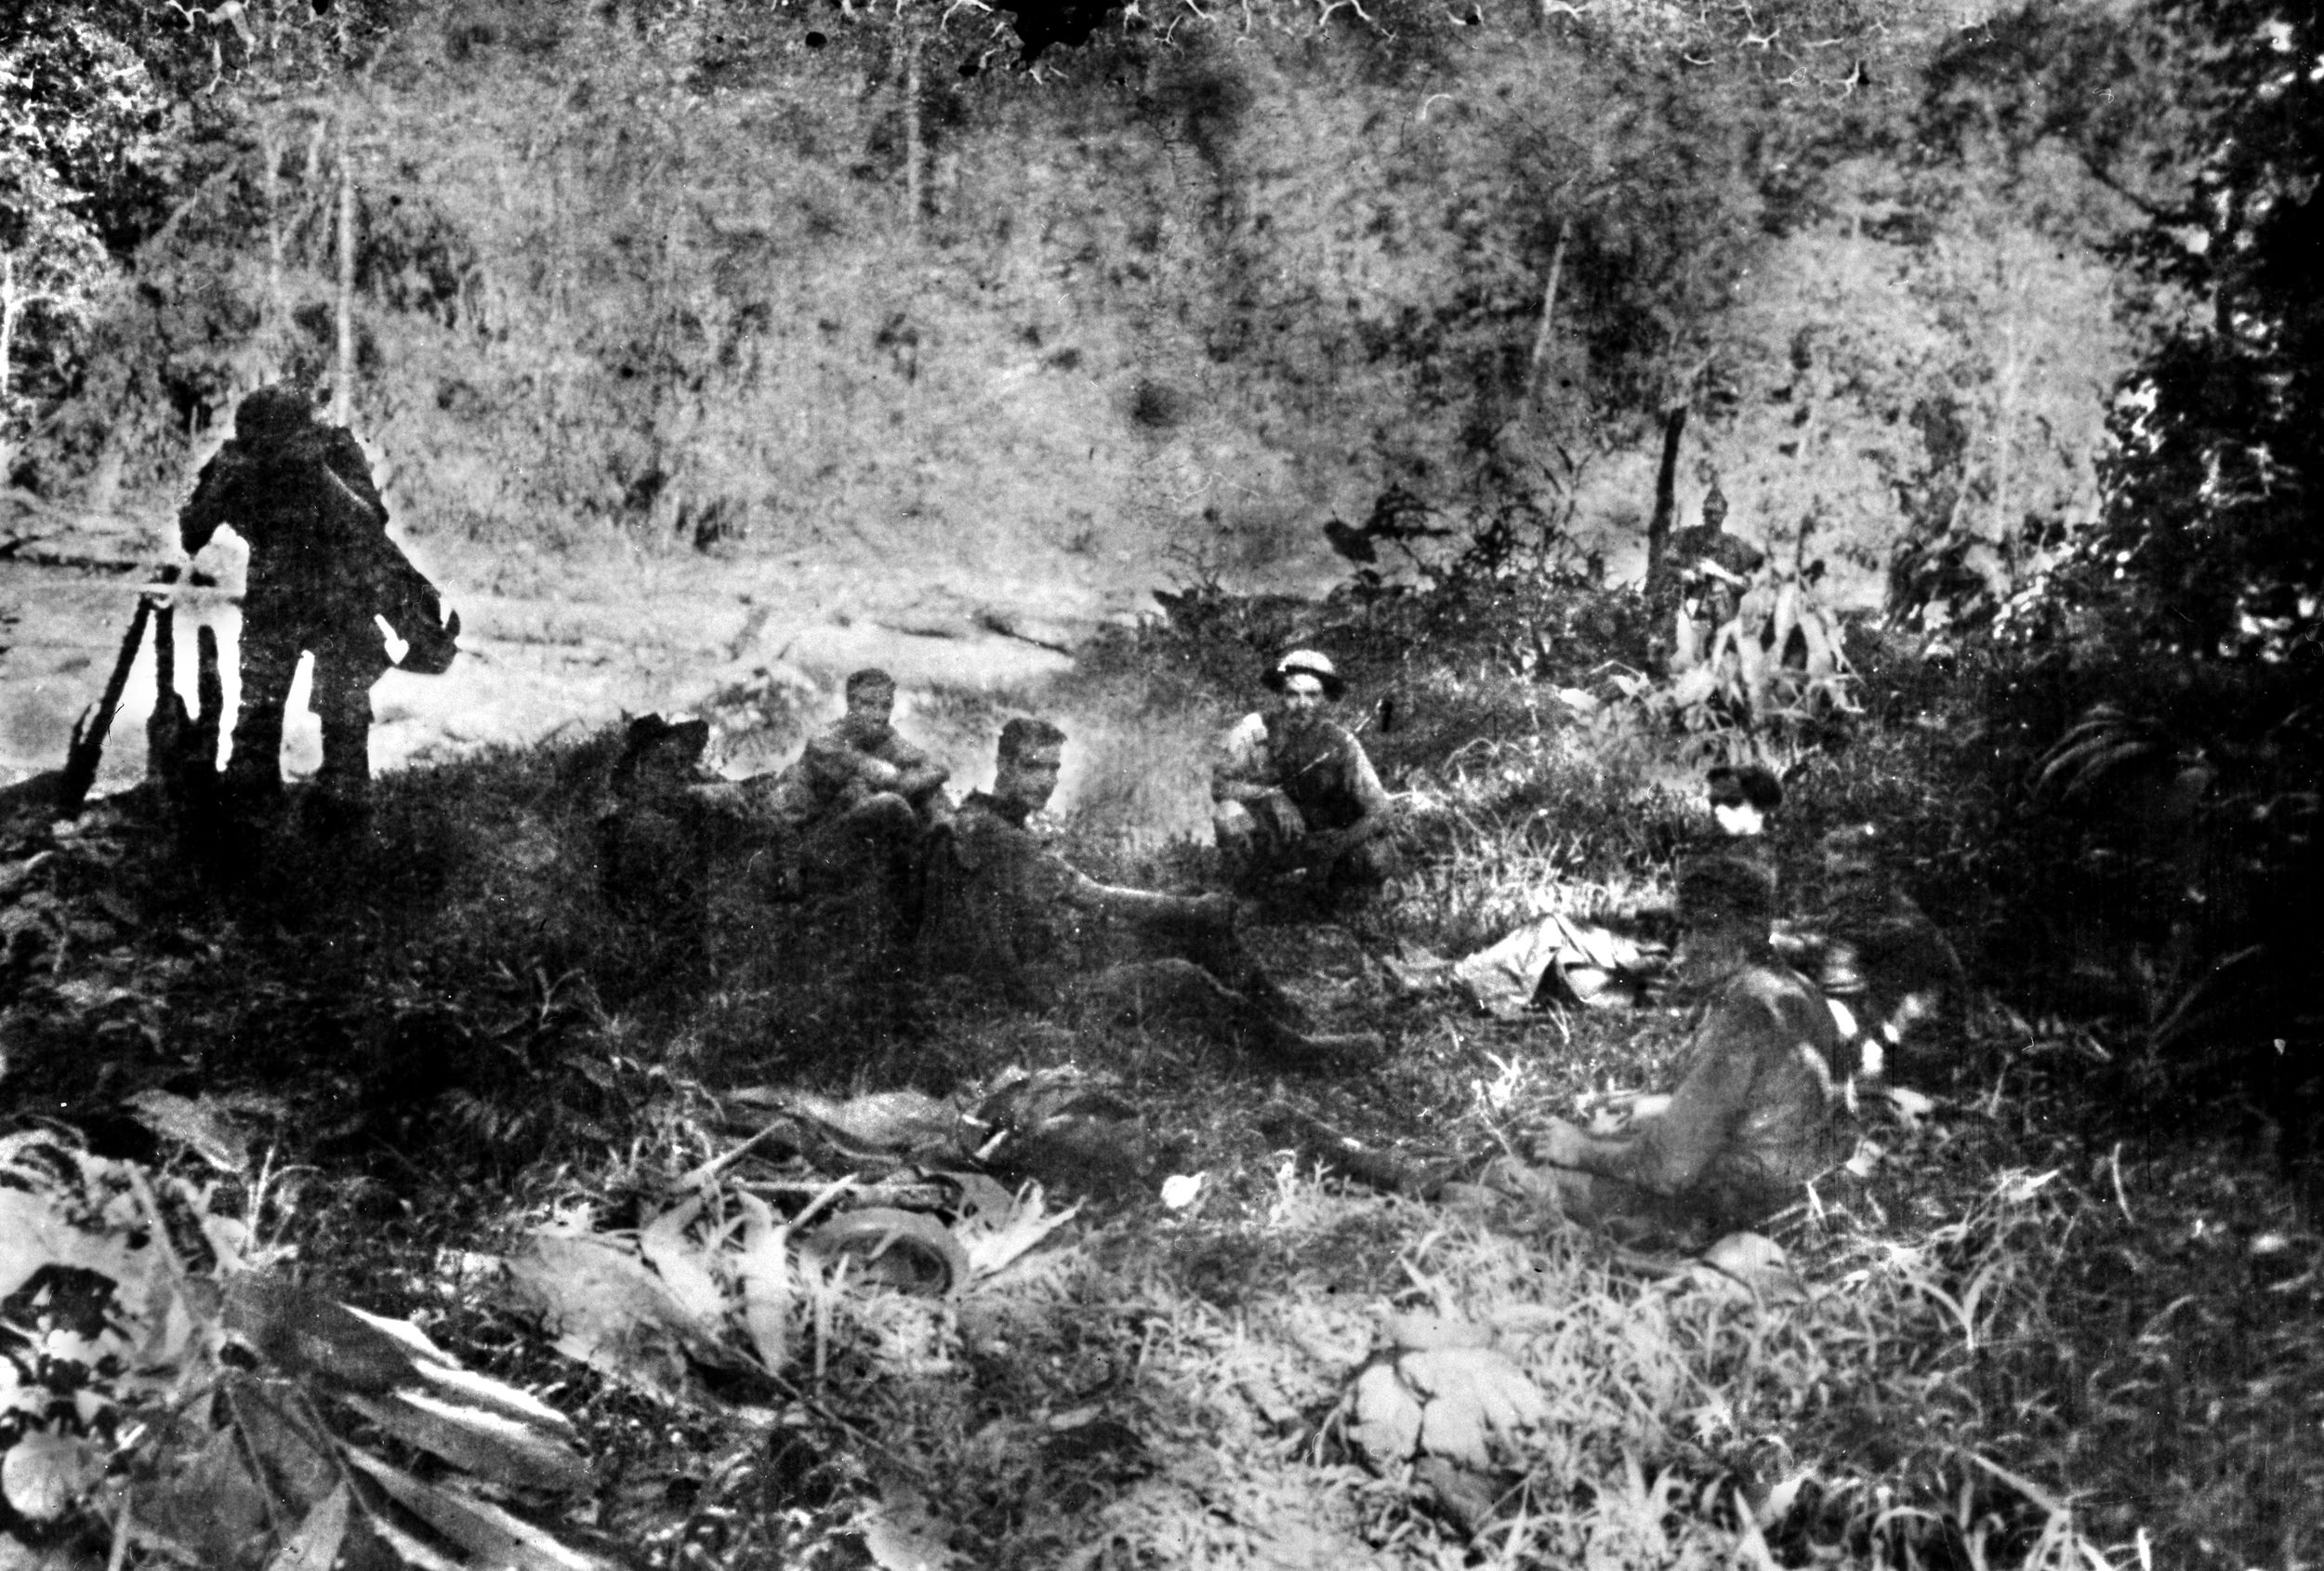 Retreating from the strong Japanese forces that landed near Rabaul on January 23, 1942, these soldiers rest briefly along a primitive trail in New Britain’s Bainings Mountains.  